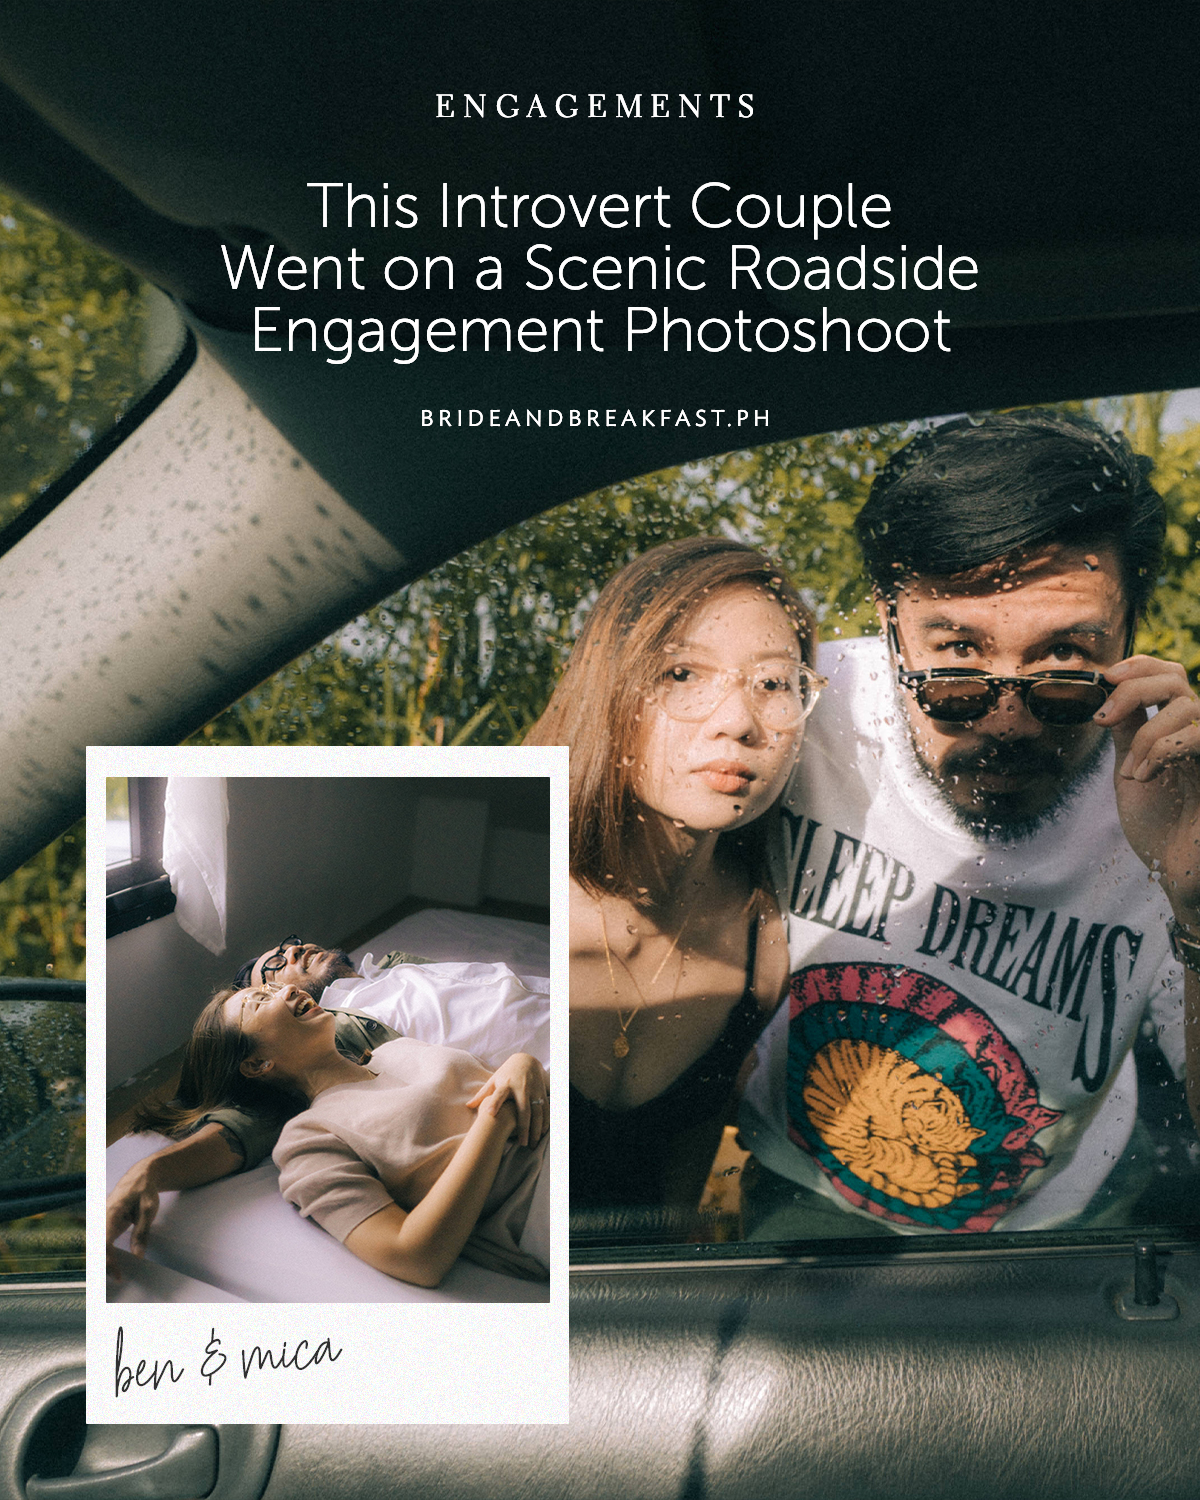 This Introvert Couple Went on a Scenic Roadside Engagement Photoshoot